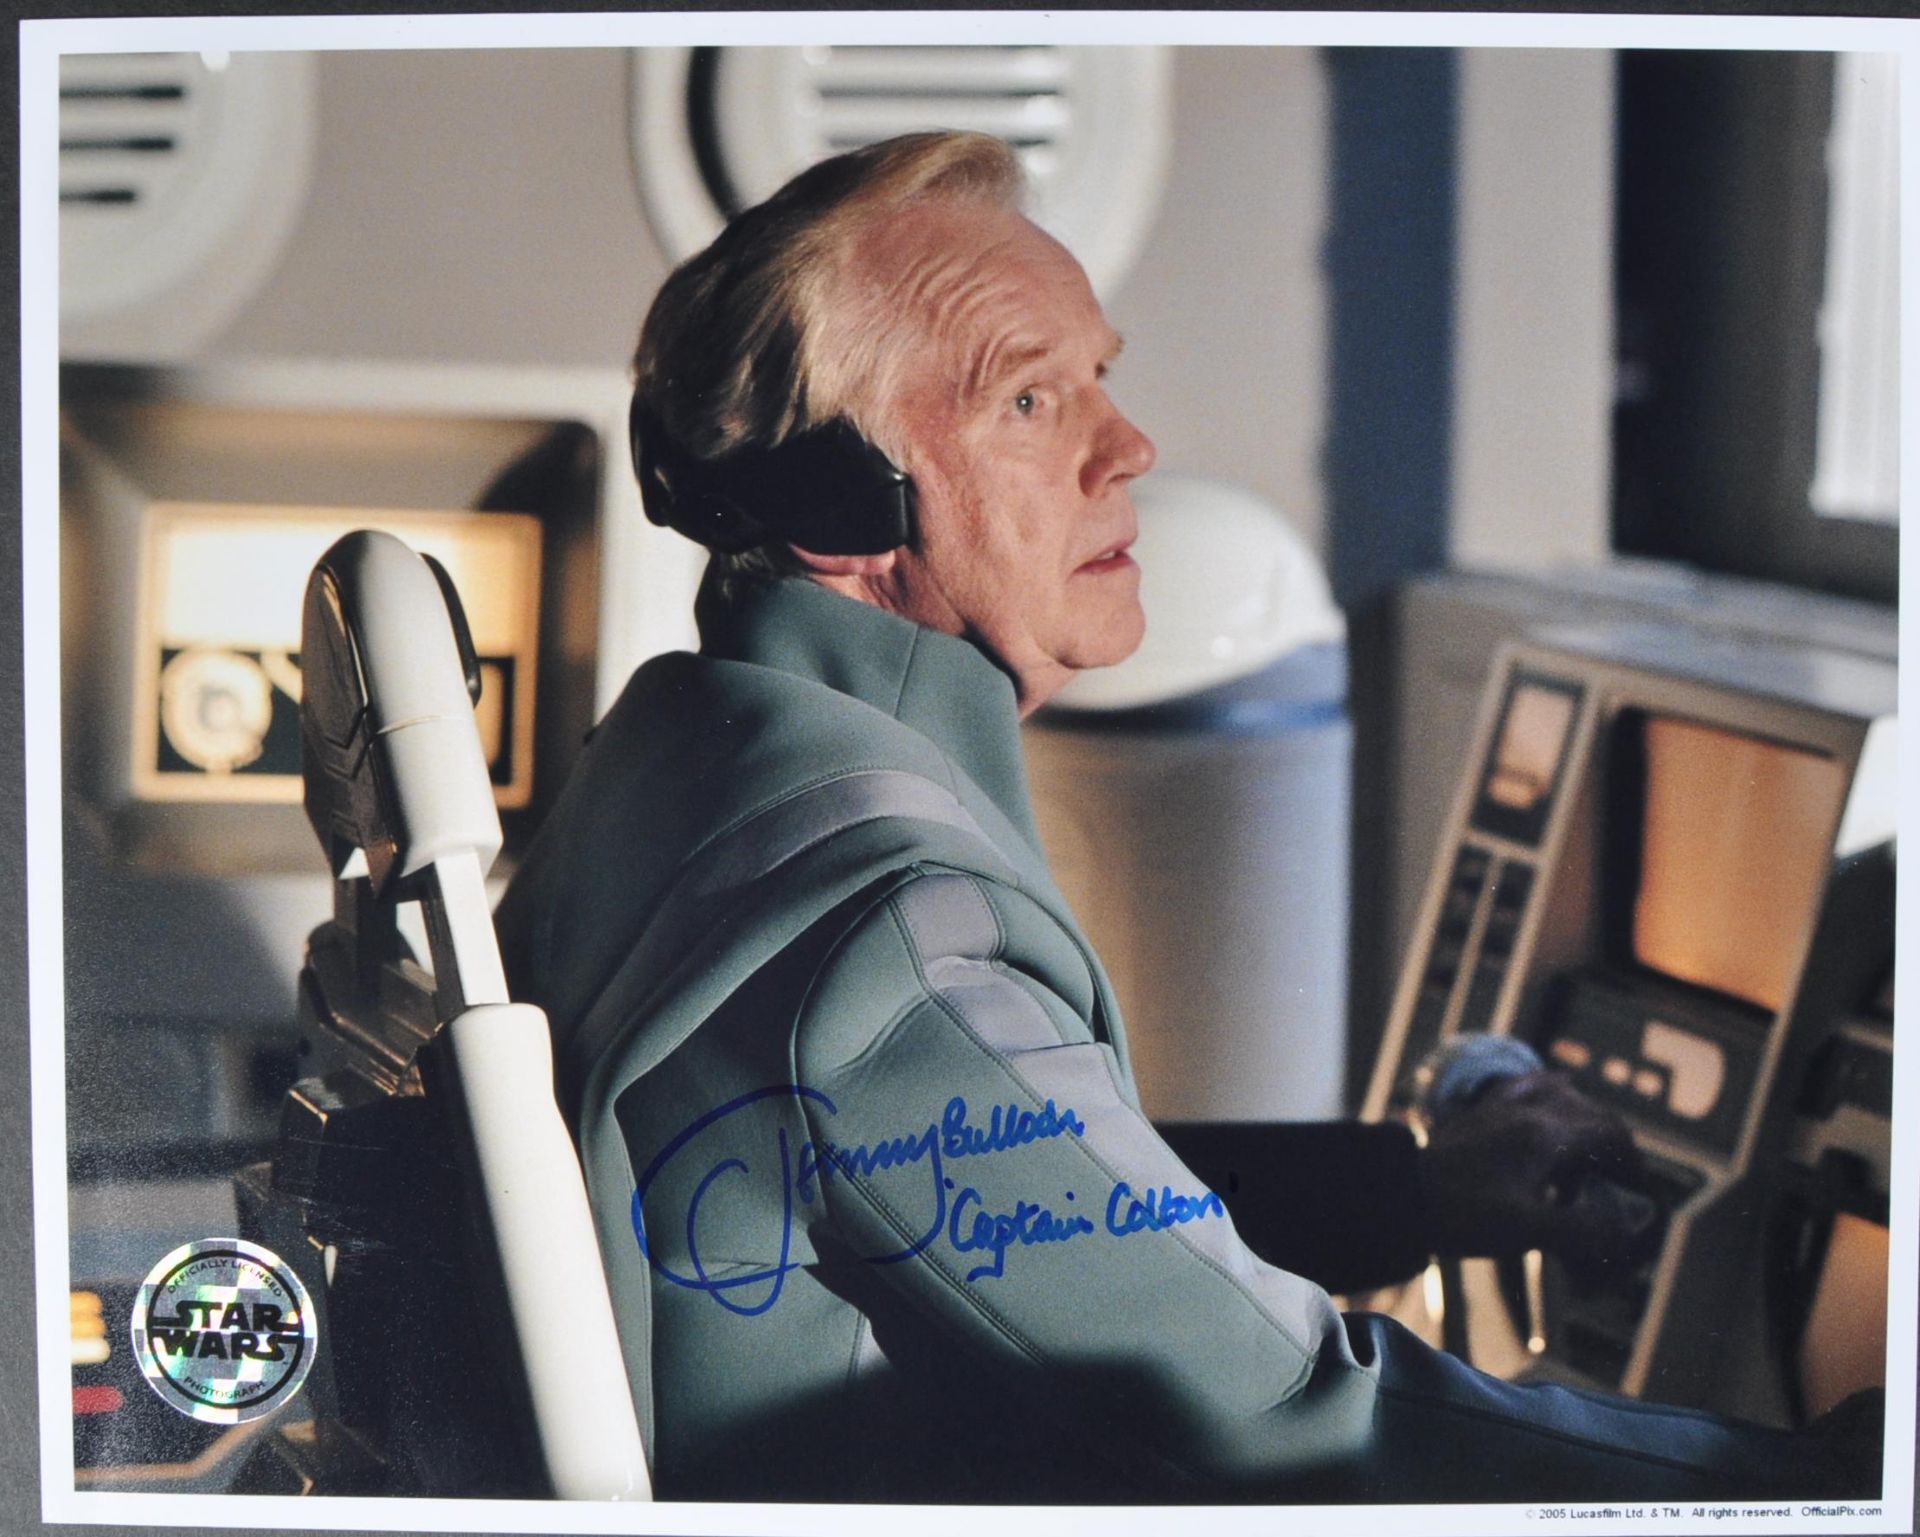 STAR WARS - JEREMY BULLOCH (1945-2020) – OFFICIAL PIX SIGNED PHOTO - Image 3 of 3